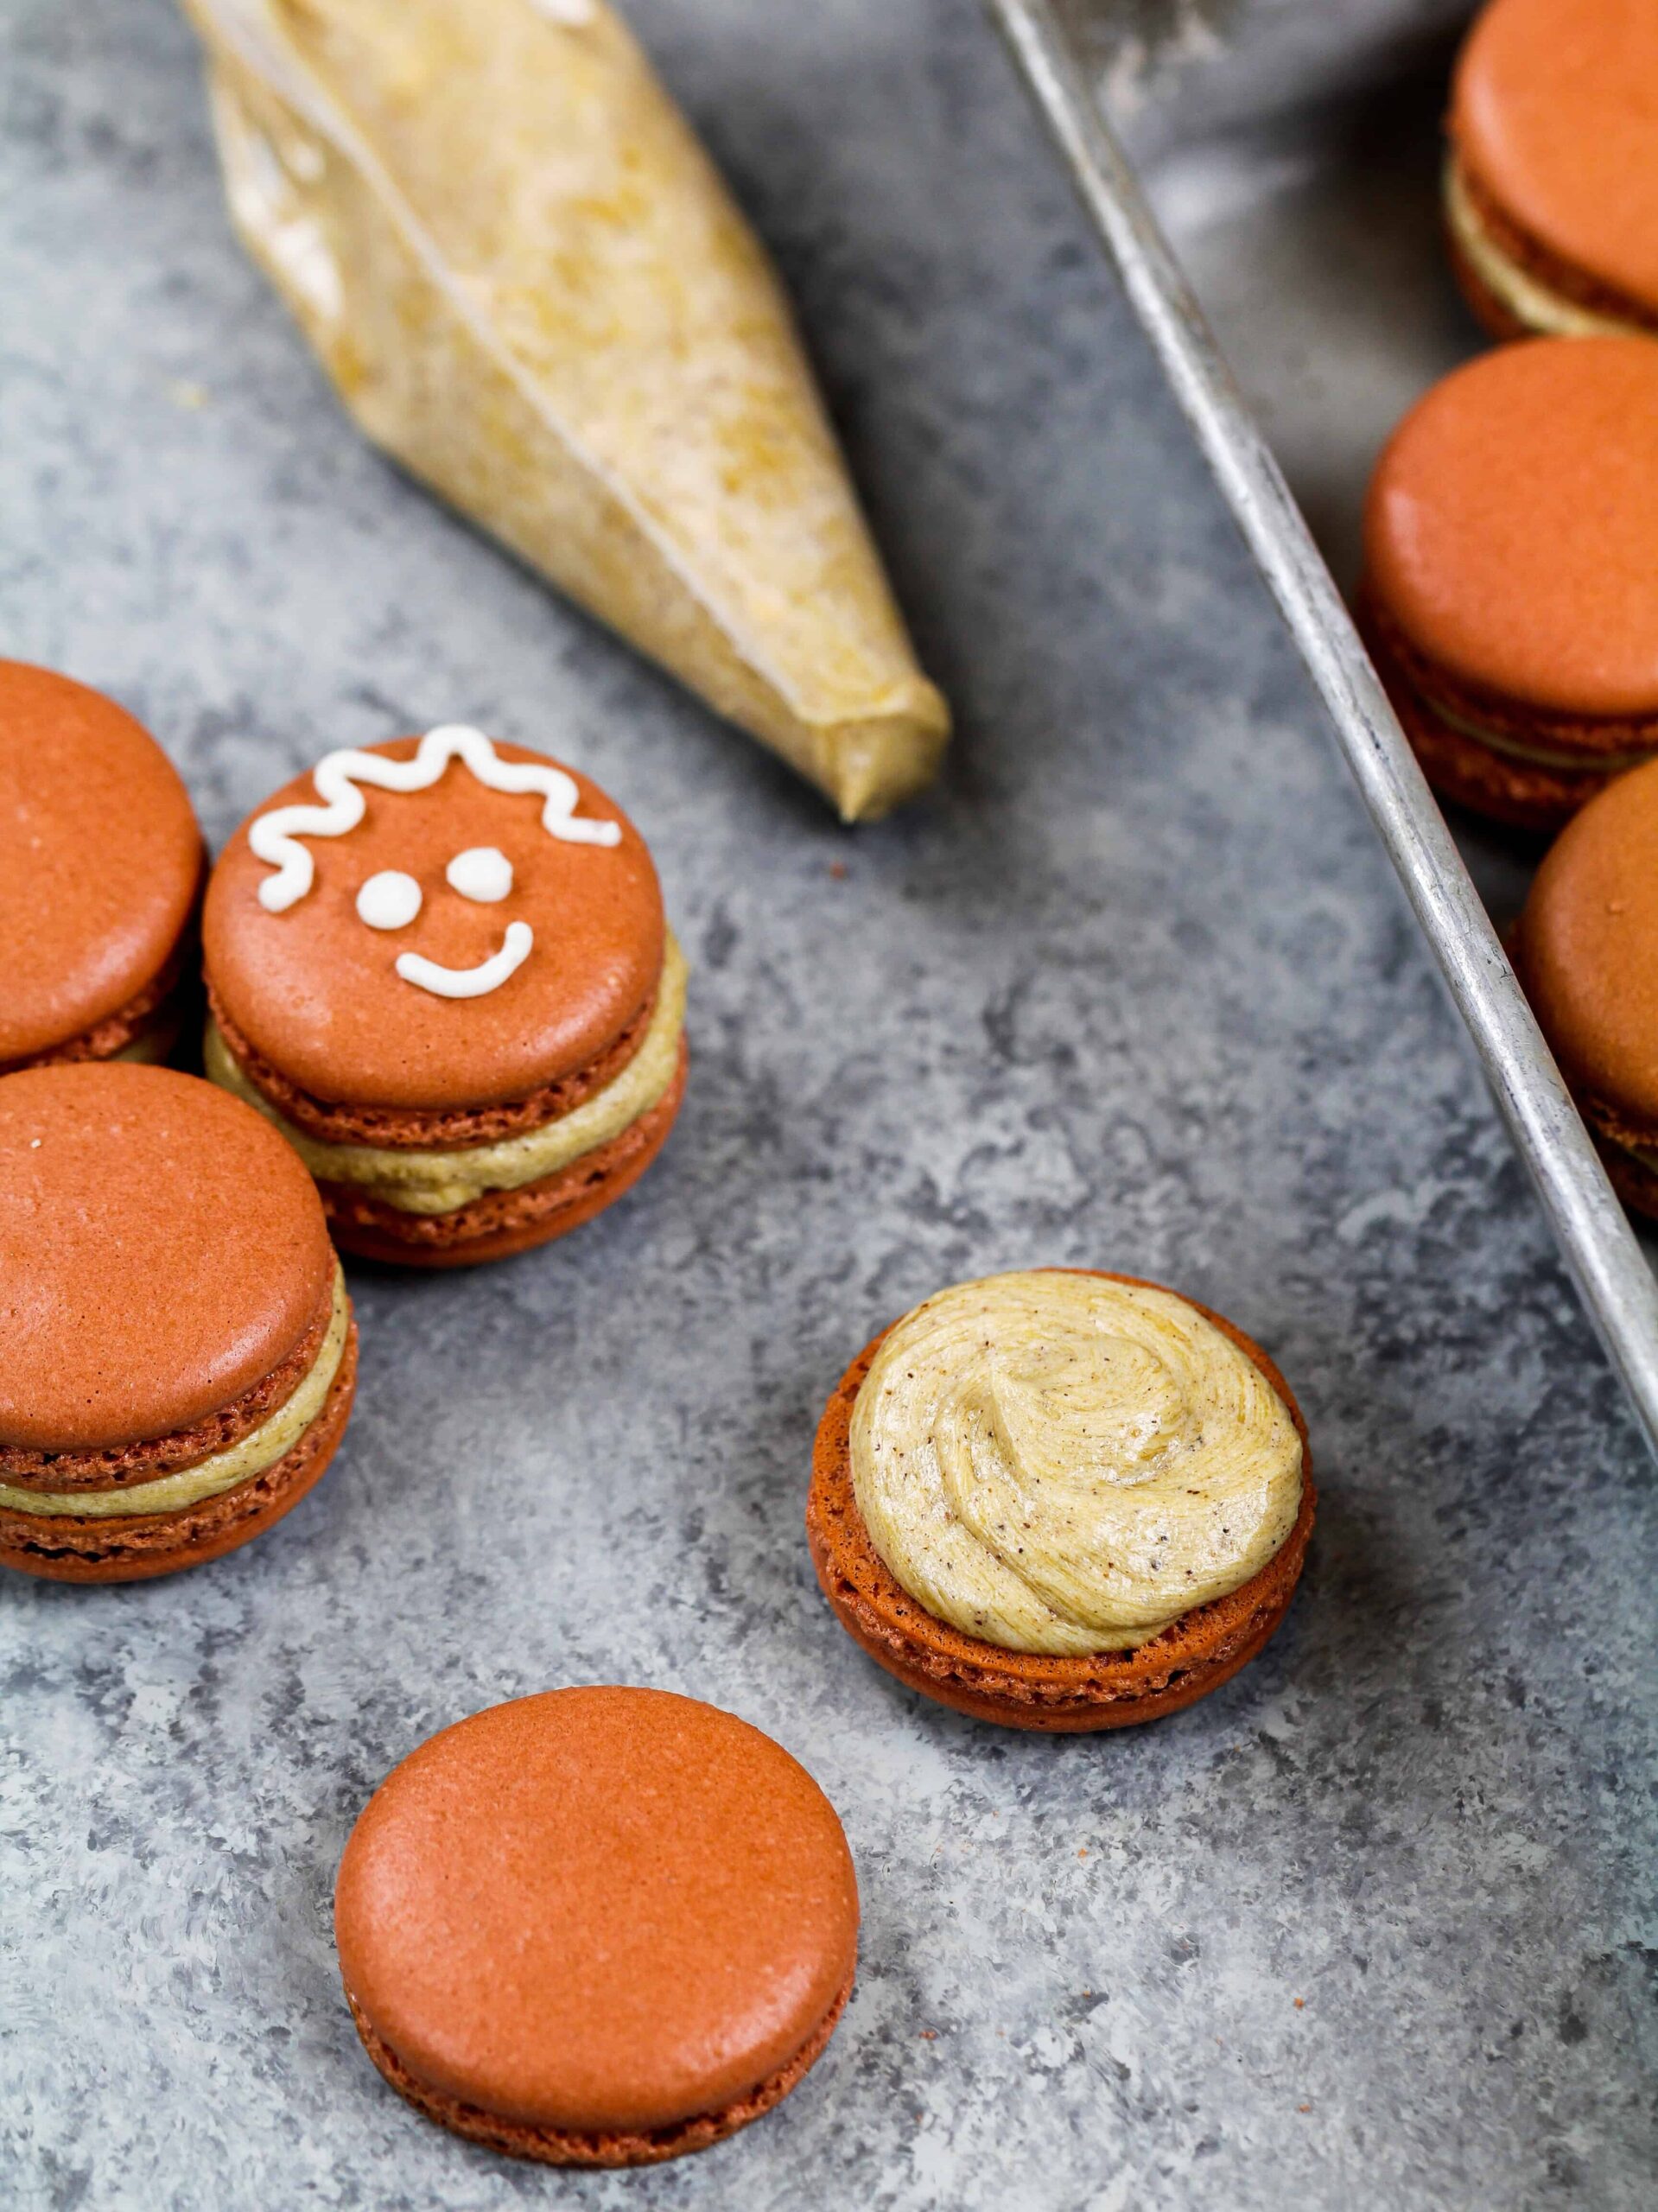 image of brown french macarons filled with gingerbread buttercream to make gingerbread macarons